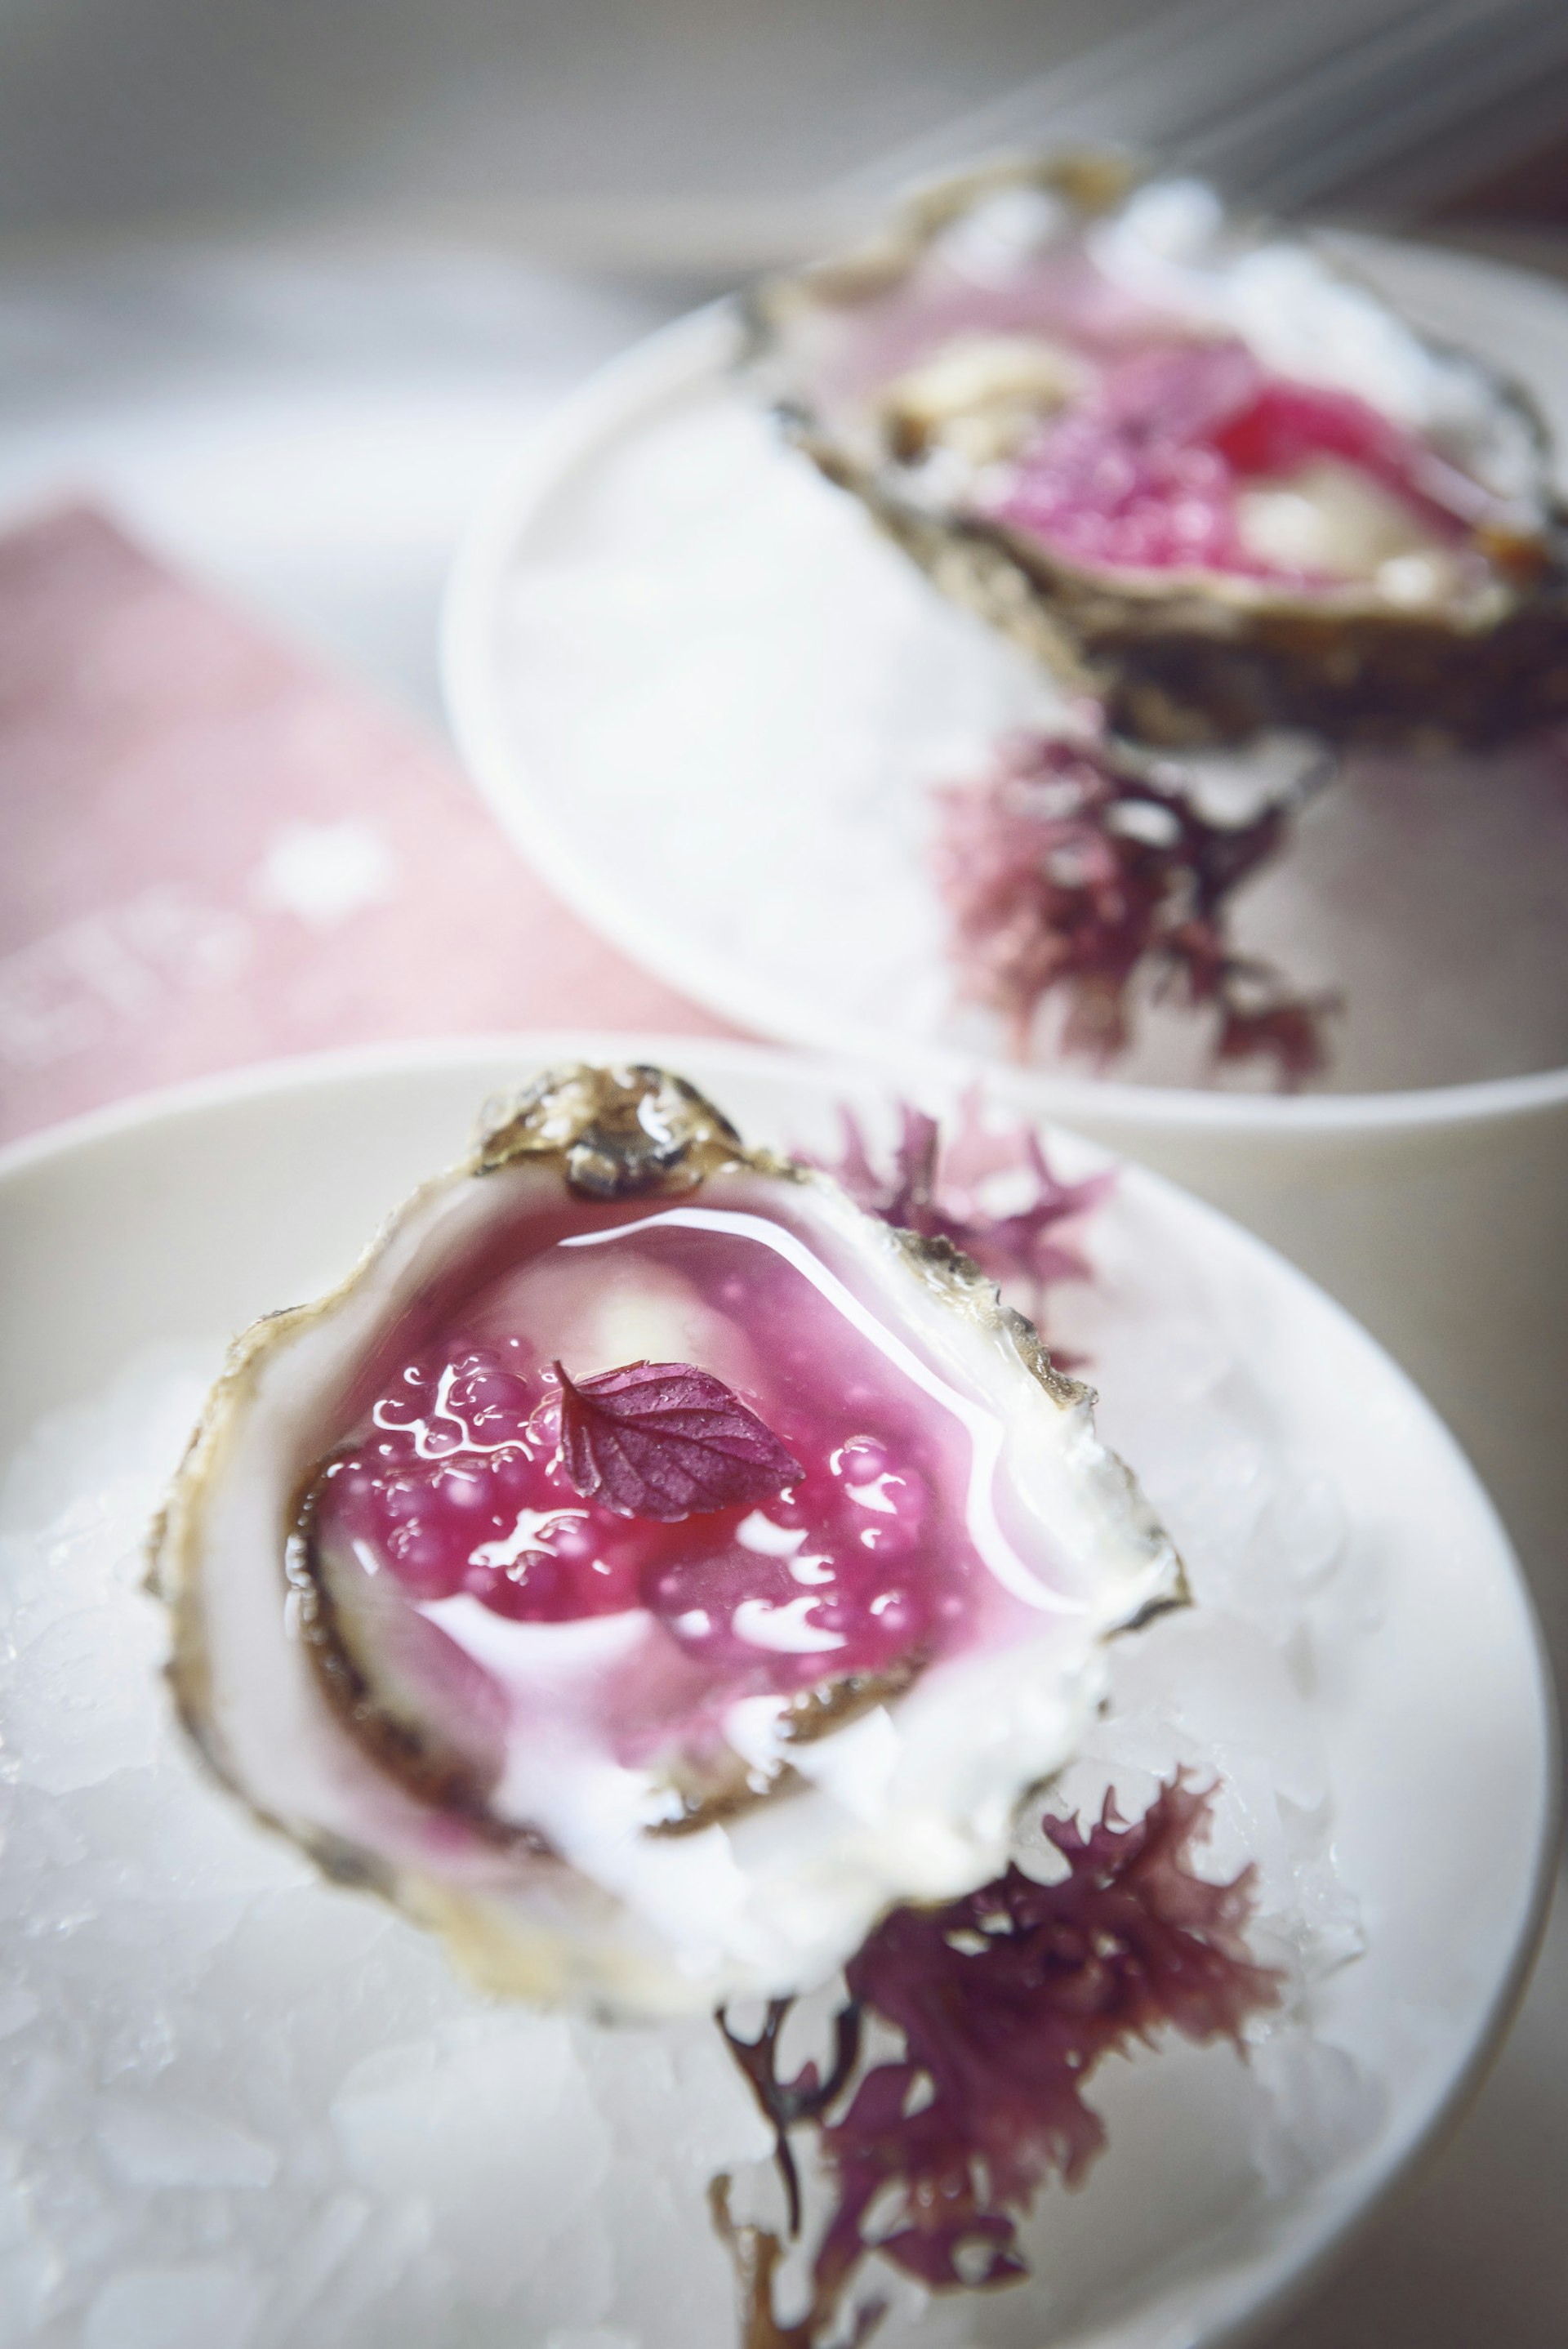 Oysters with shiso vinegar at Tickets © Jonathan Stokes / Lonely Planet